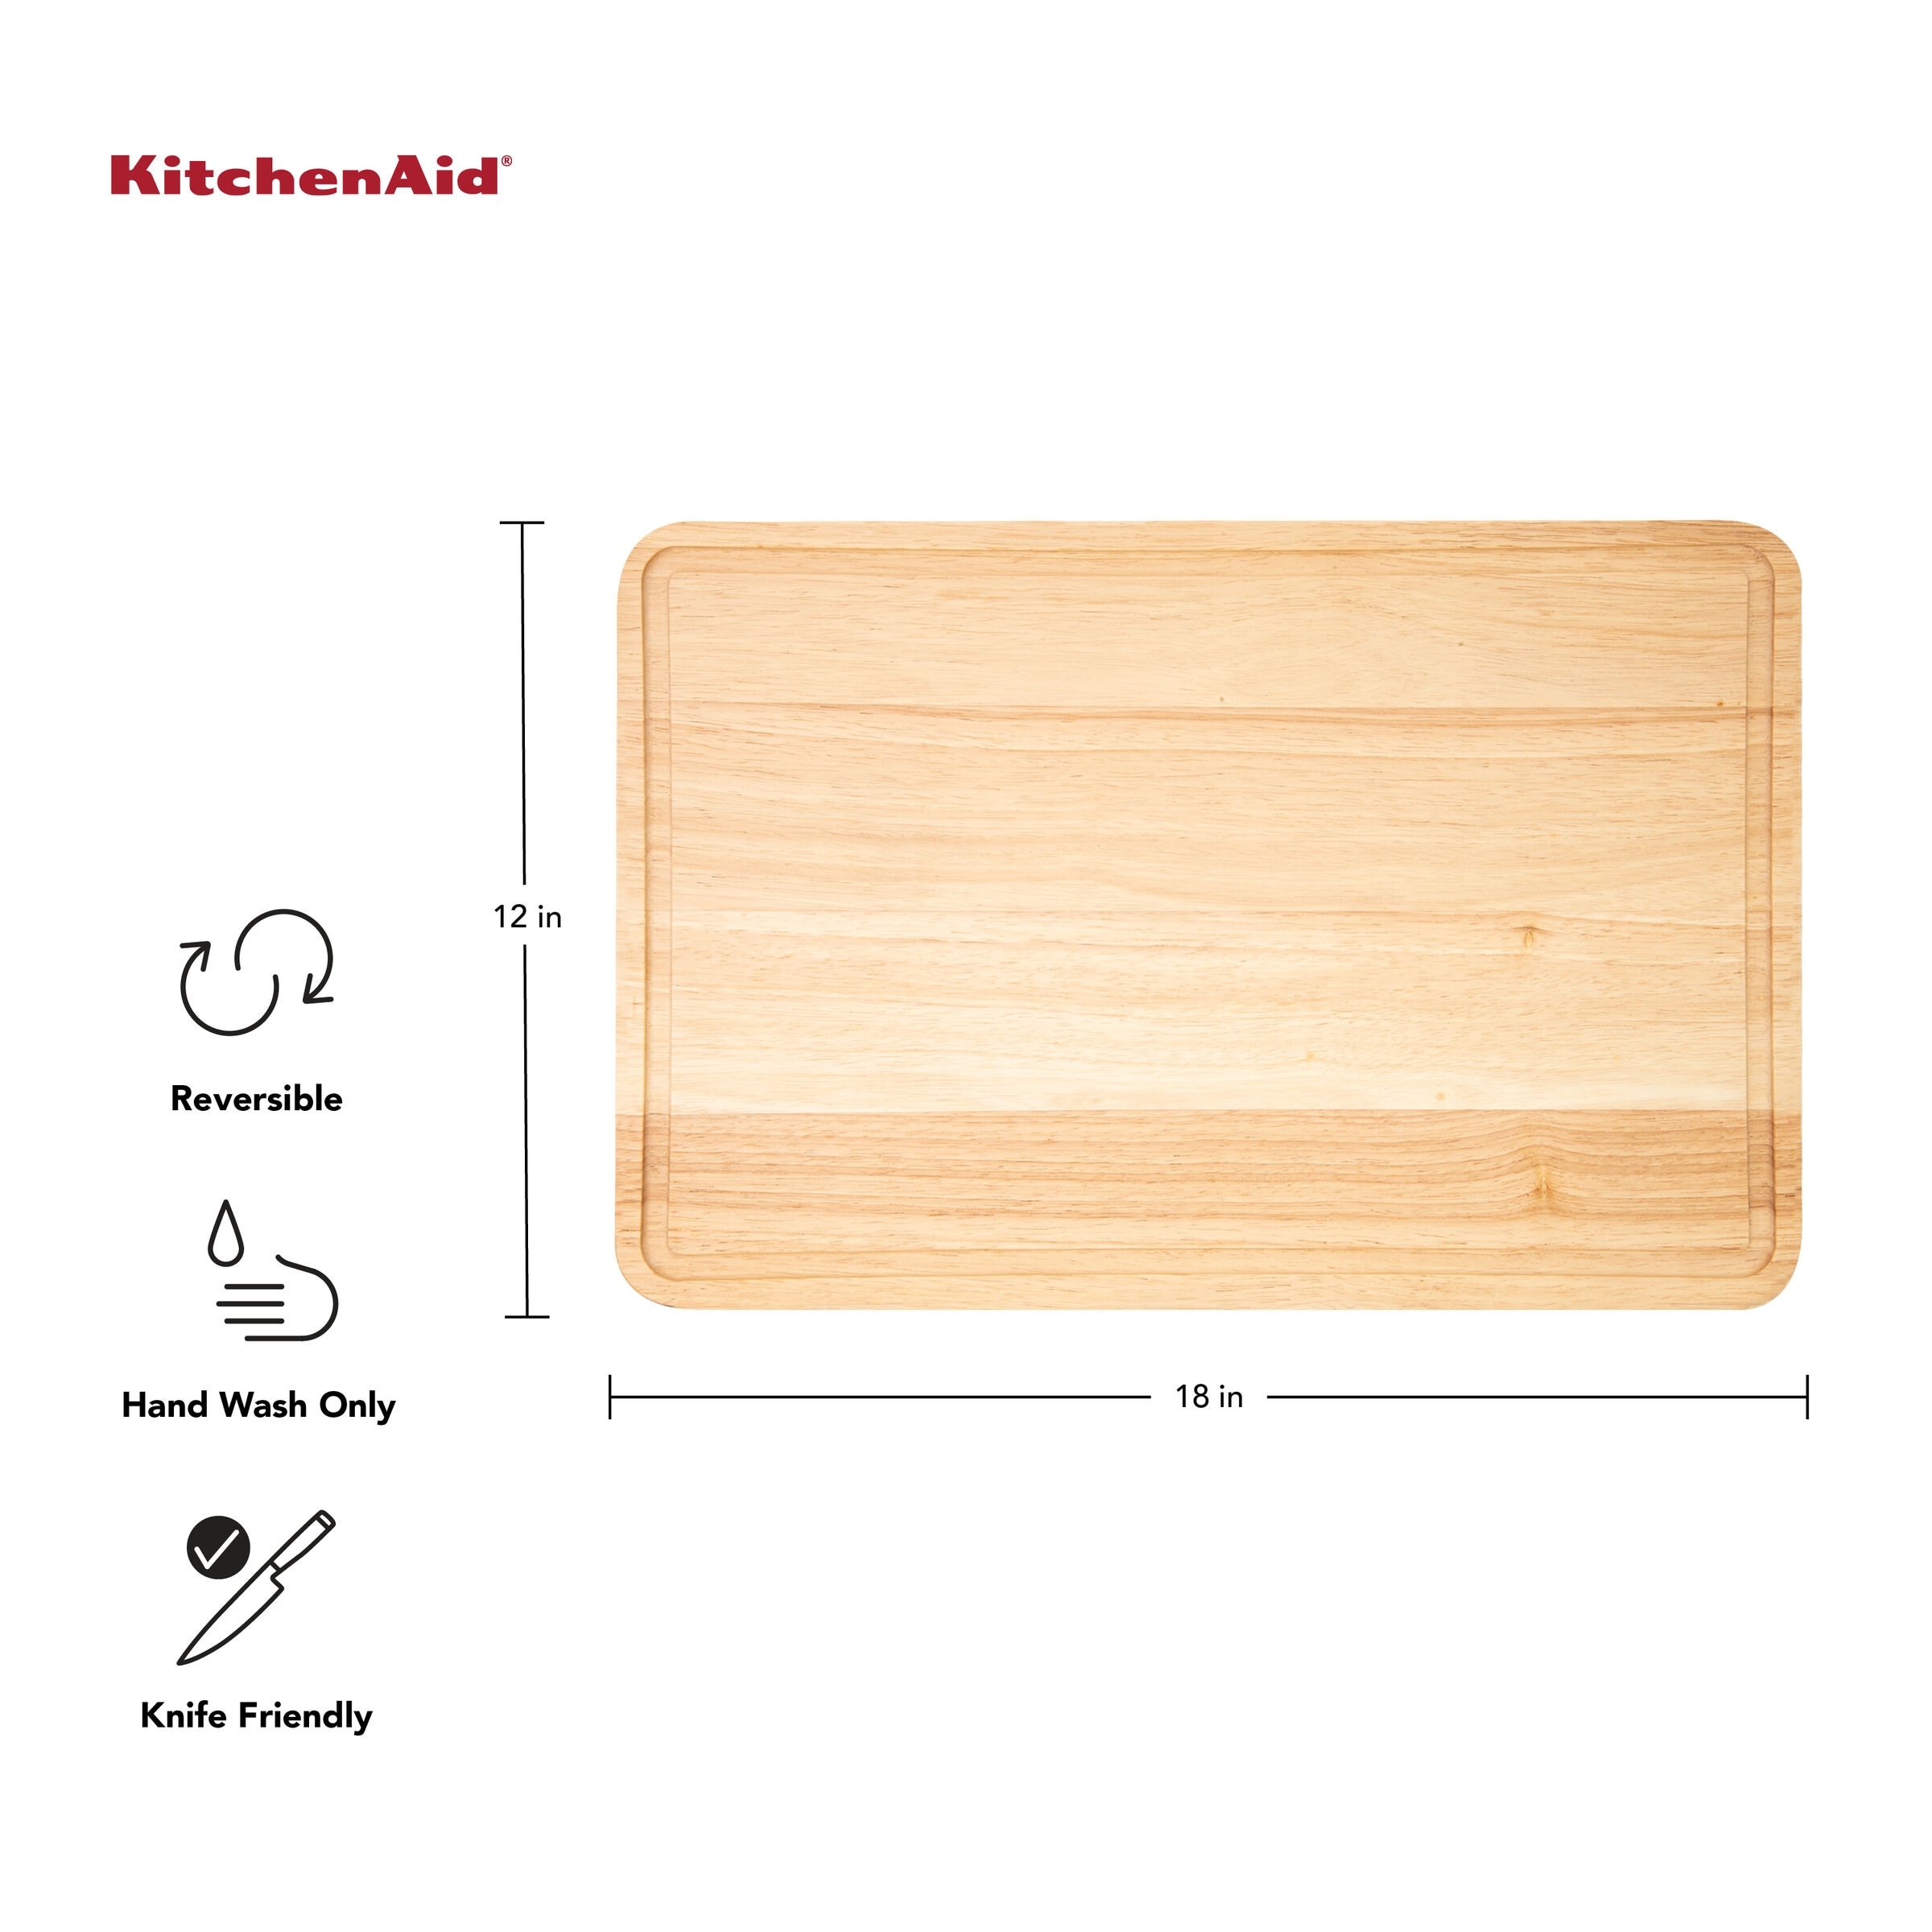 https://ak1.ostkcdn.com/images/products/is/images/direct/4de99ec5465e055acf77c7cae4bedaef38f68ad5/KitchenAid-Classic-Wood-Cutting-Board%2C-12x18-Inch%2C-Natural.jpg